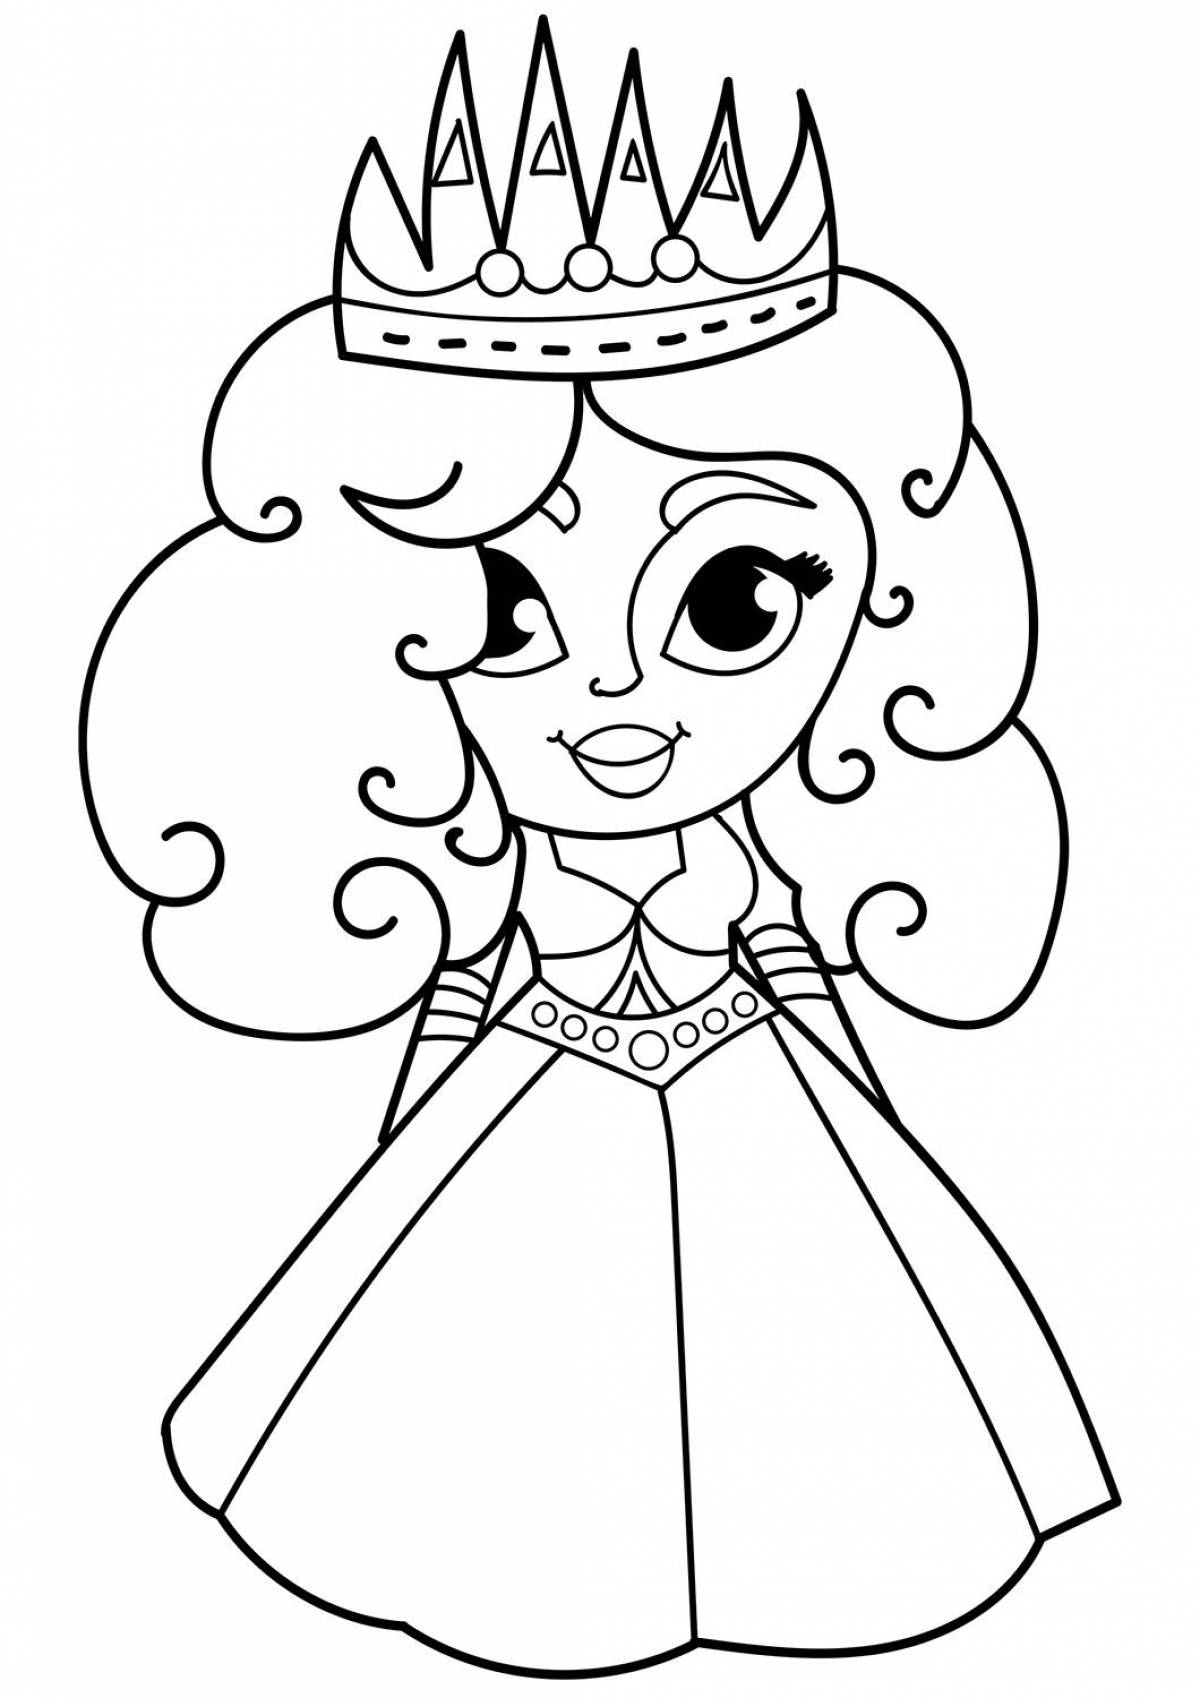 Shining princess coloring book for kids 5-6 years old